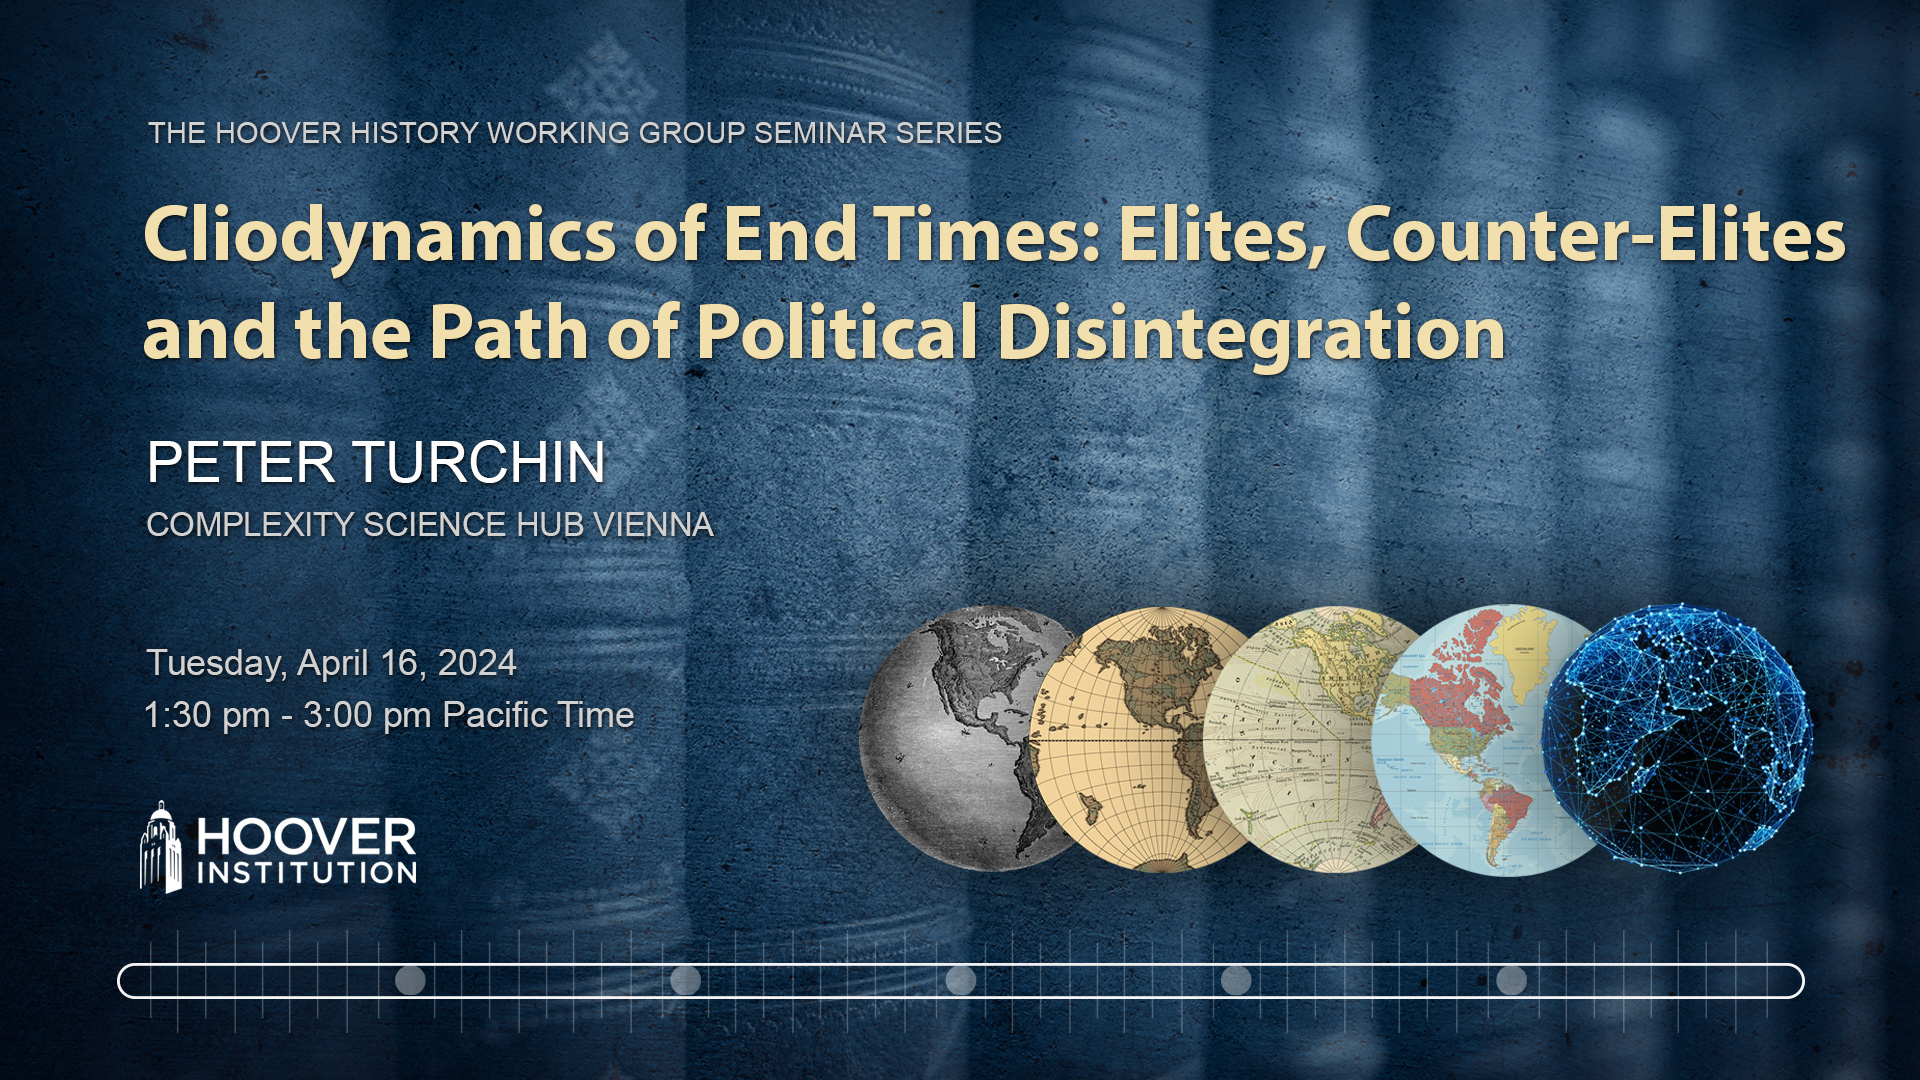 Cliodynamics of End Times: Elites, Counter-Elites and the Path of Political Disintegration